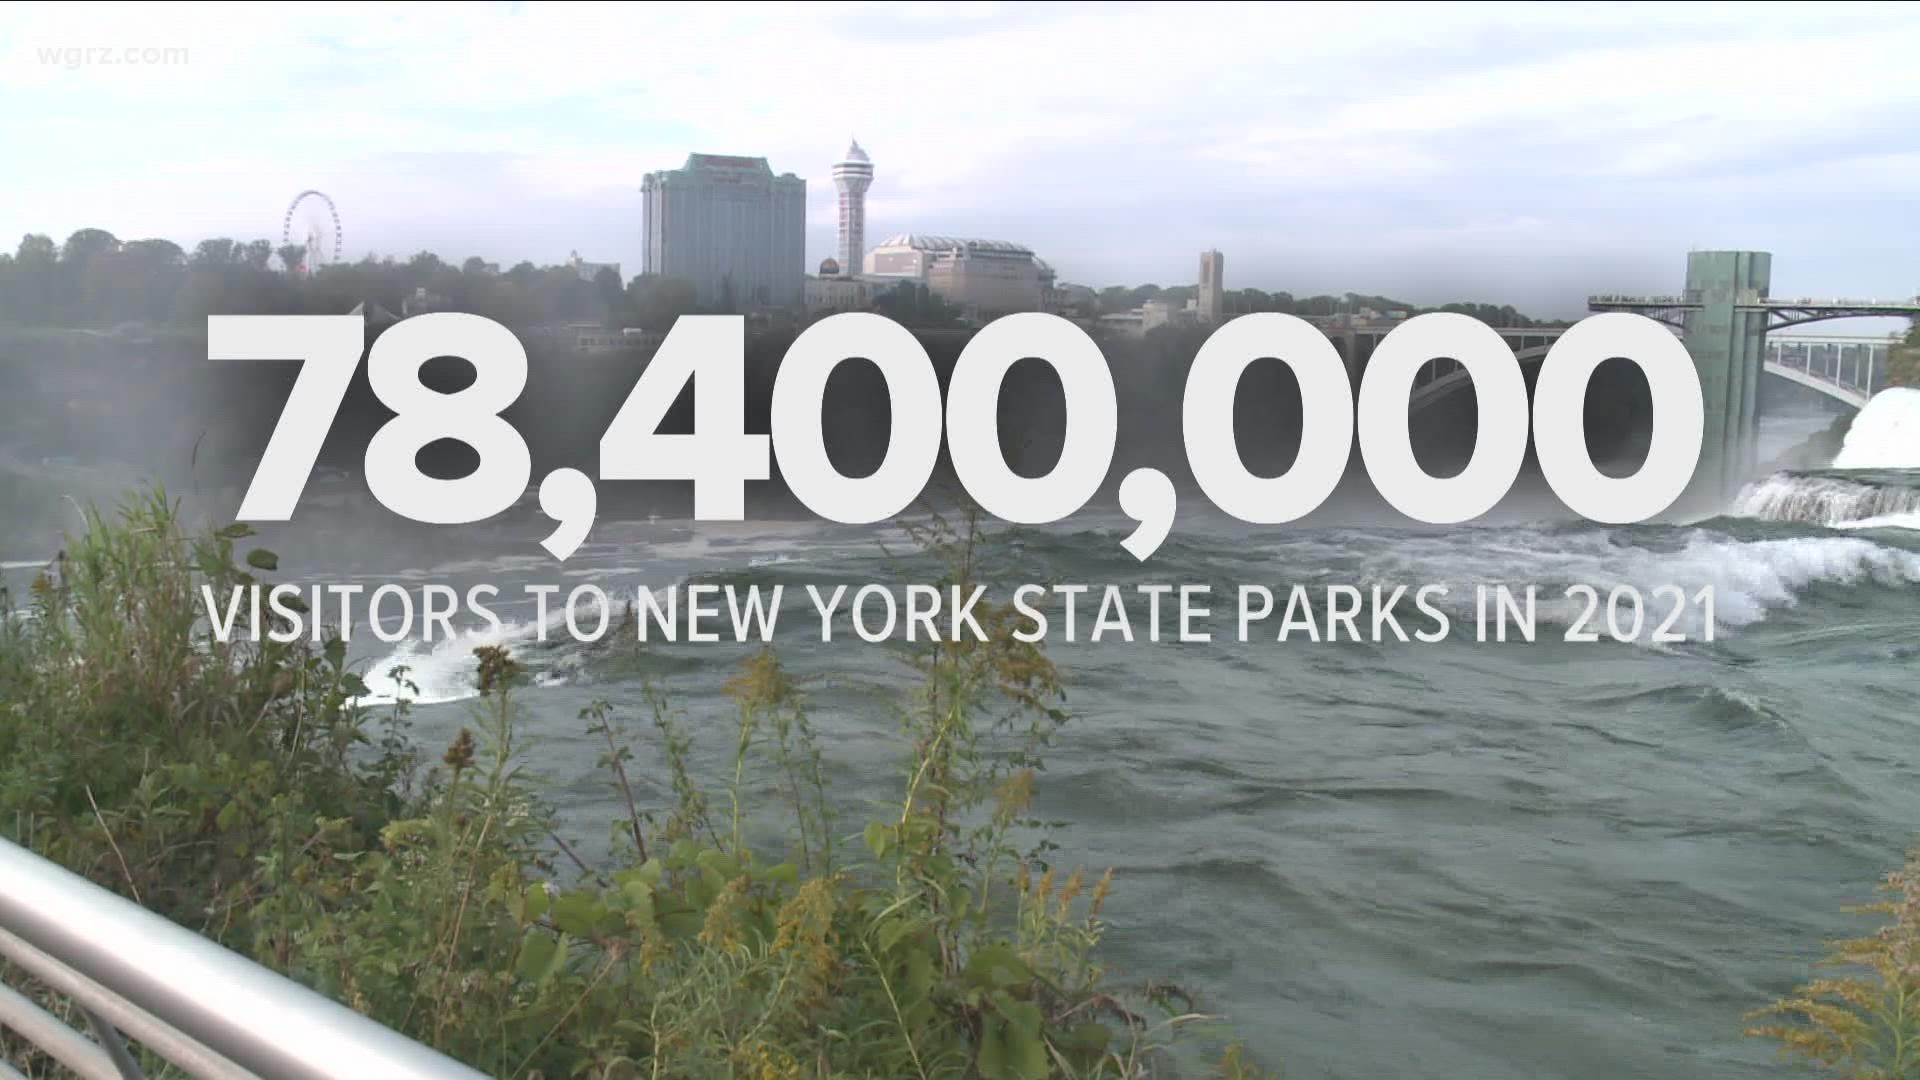 Governor Hochul announced Tuesday that New York State parks set a new record in 2021.